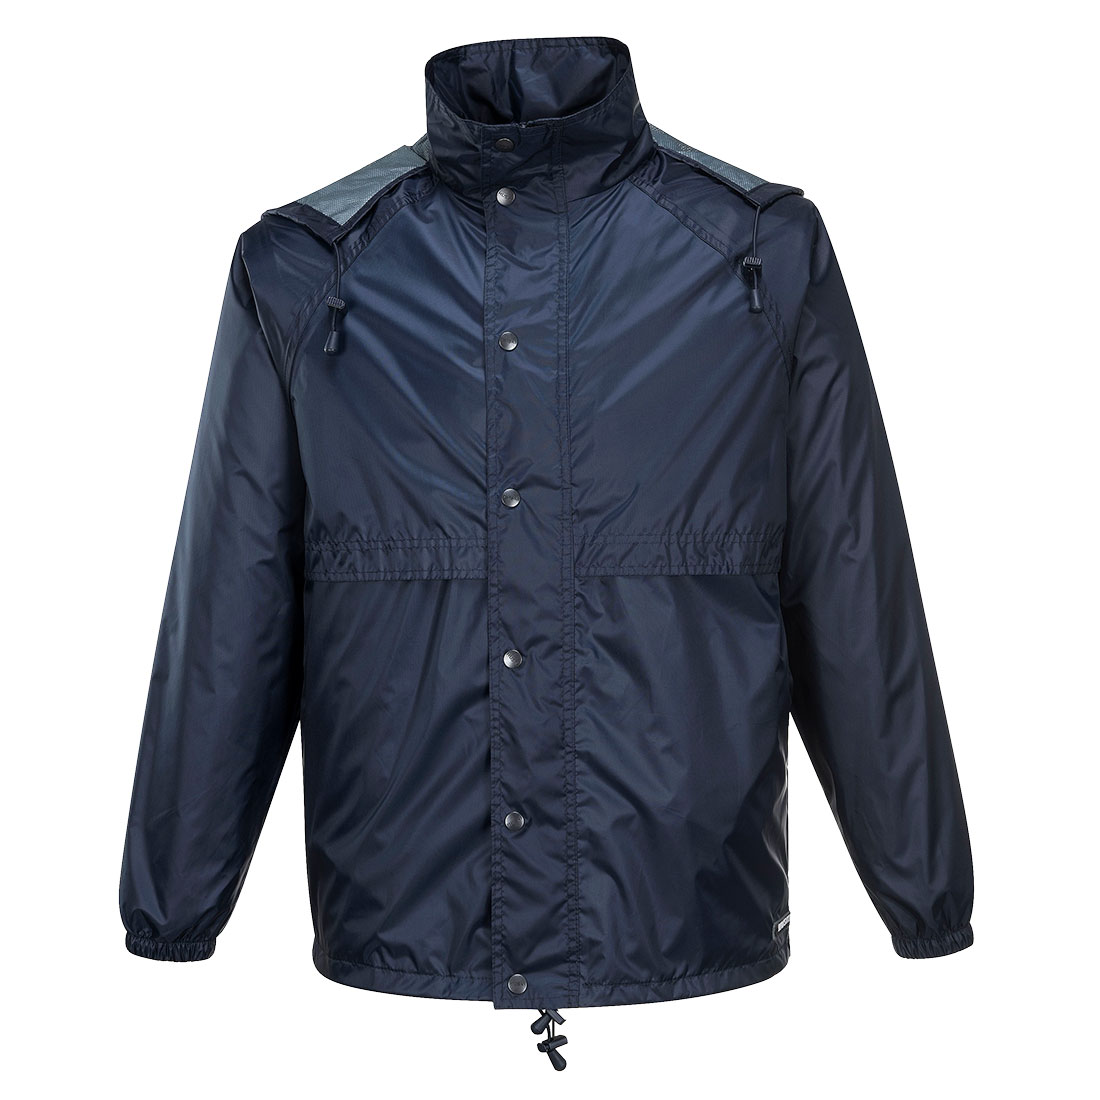 HUSKI STRATUS JACKET a packable fully lined jacket